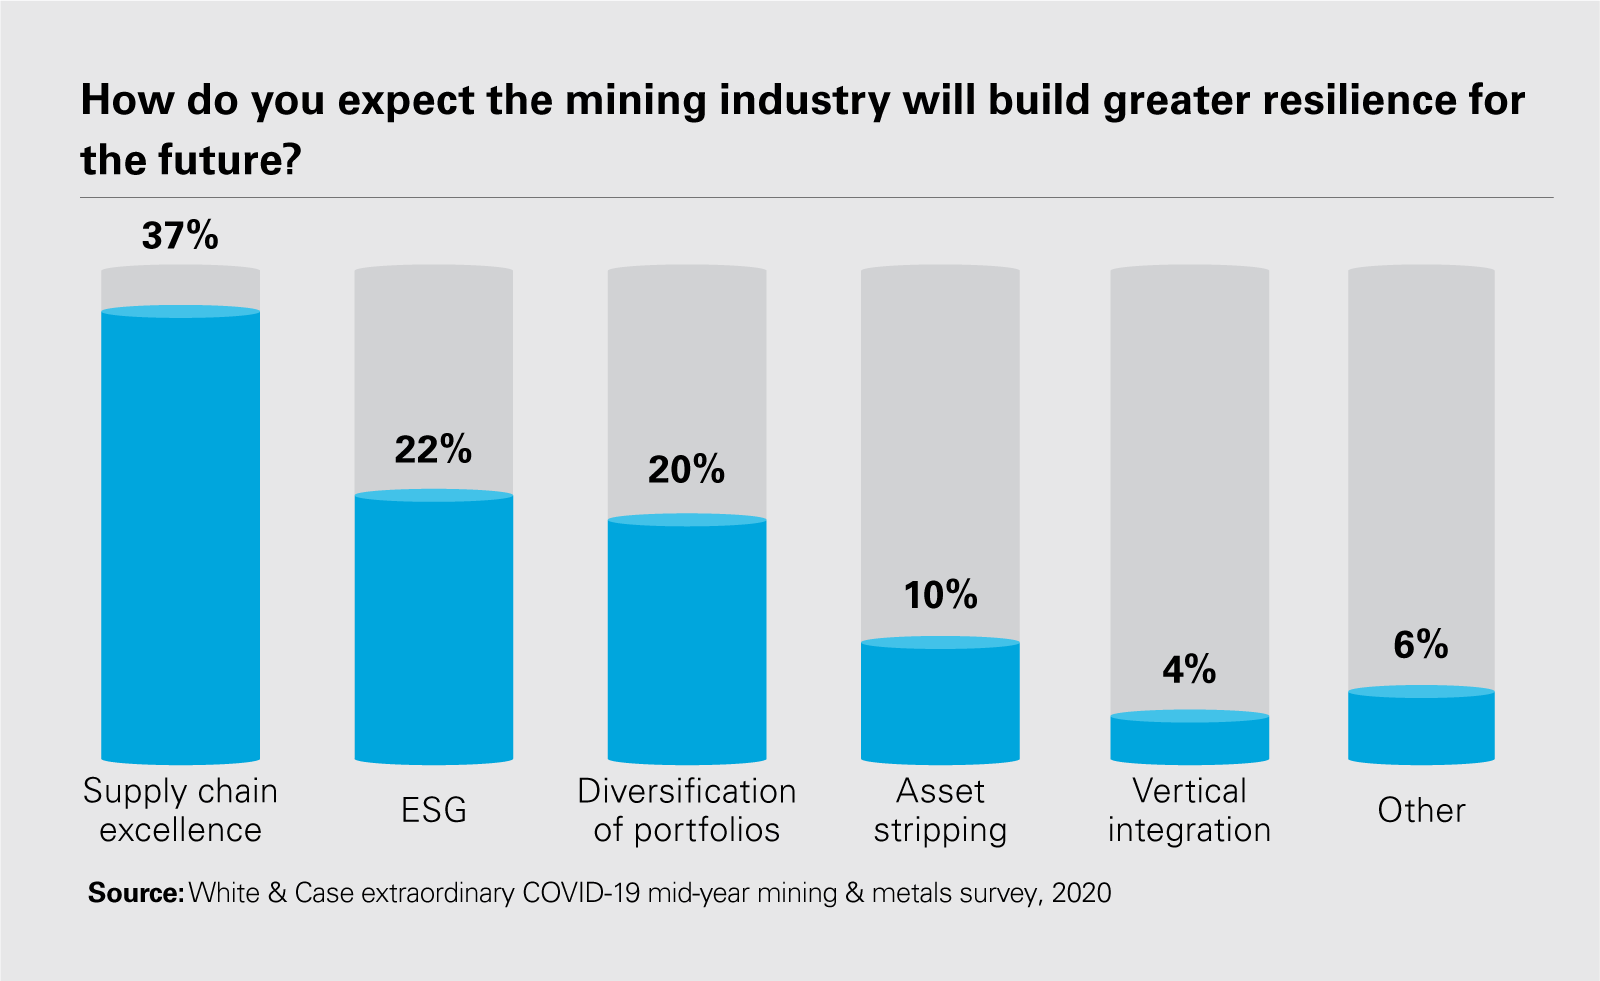 How do you expect the mining industry will build greater resilience for the future?